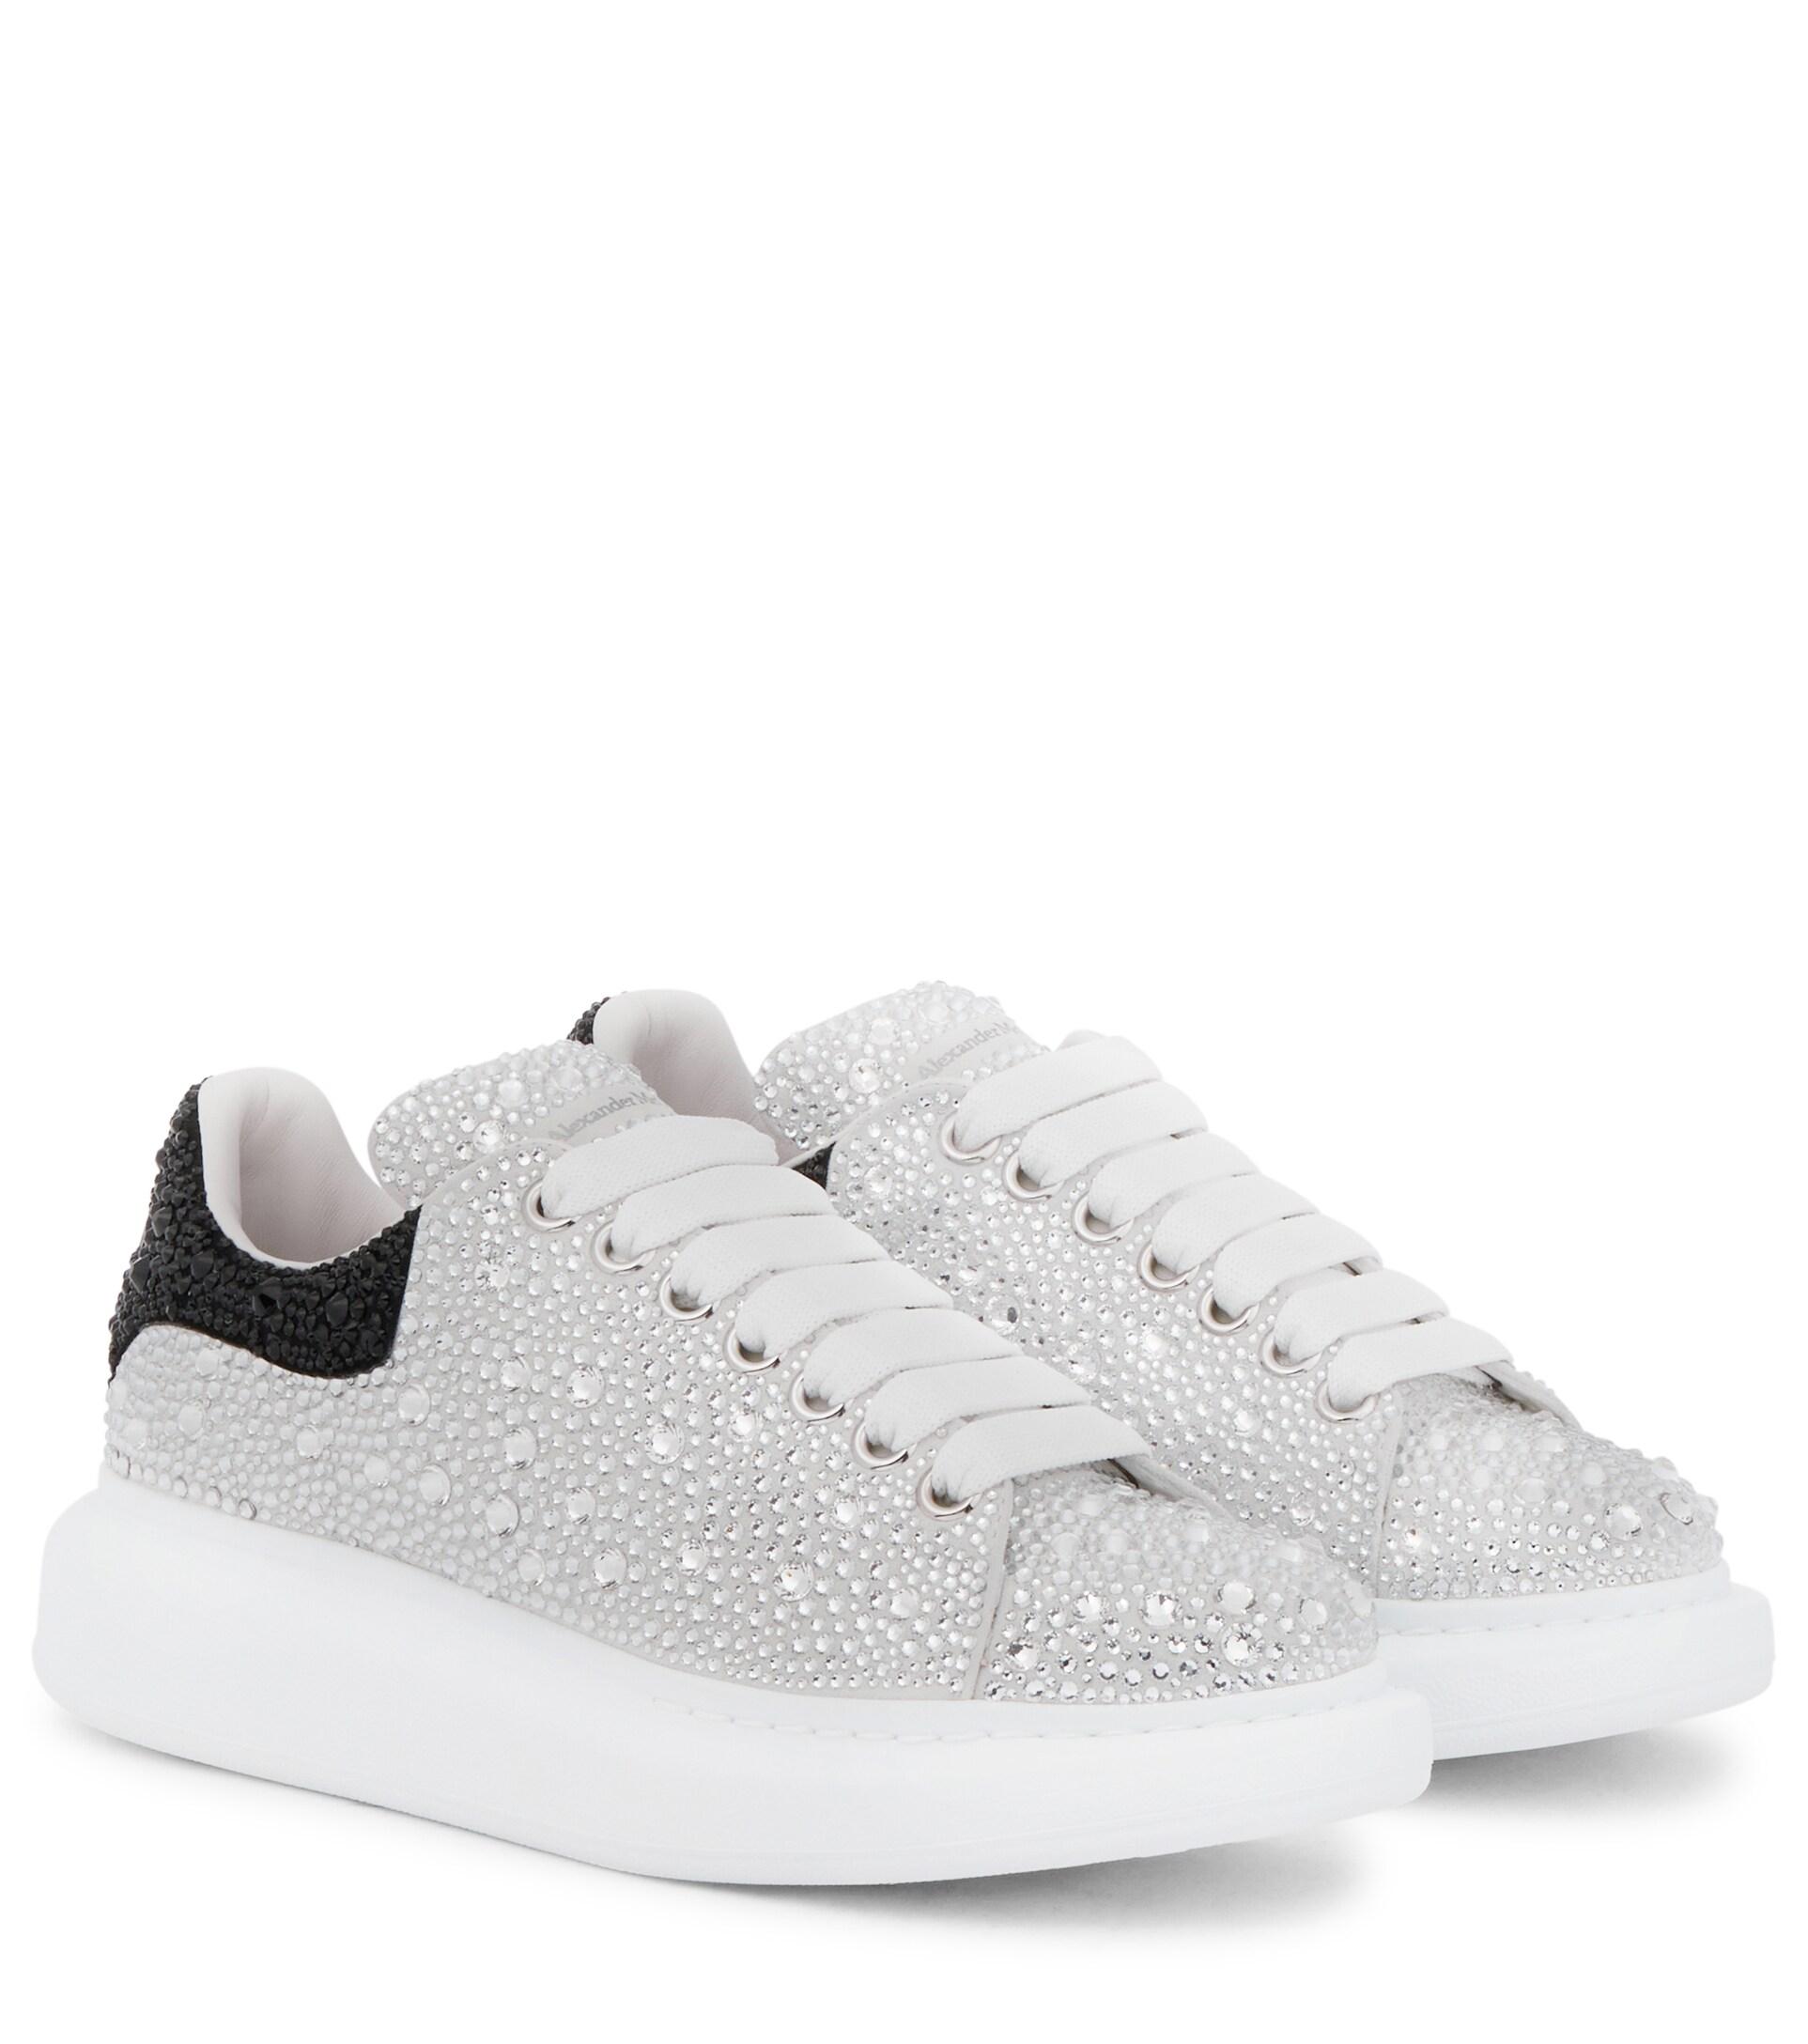 Alexander McQueen Embellished Leather Sneakers in White | Lyst